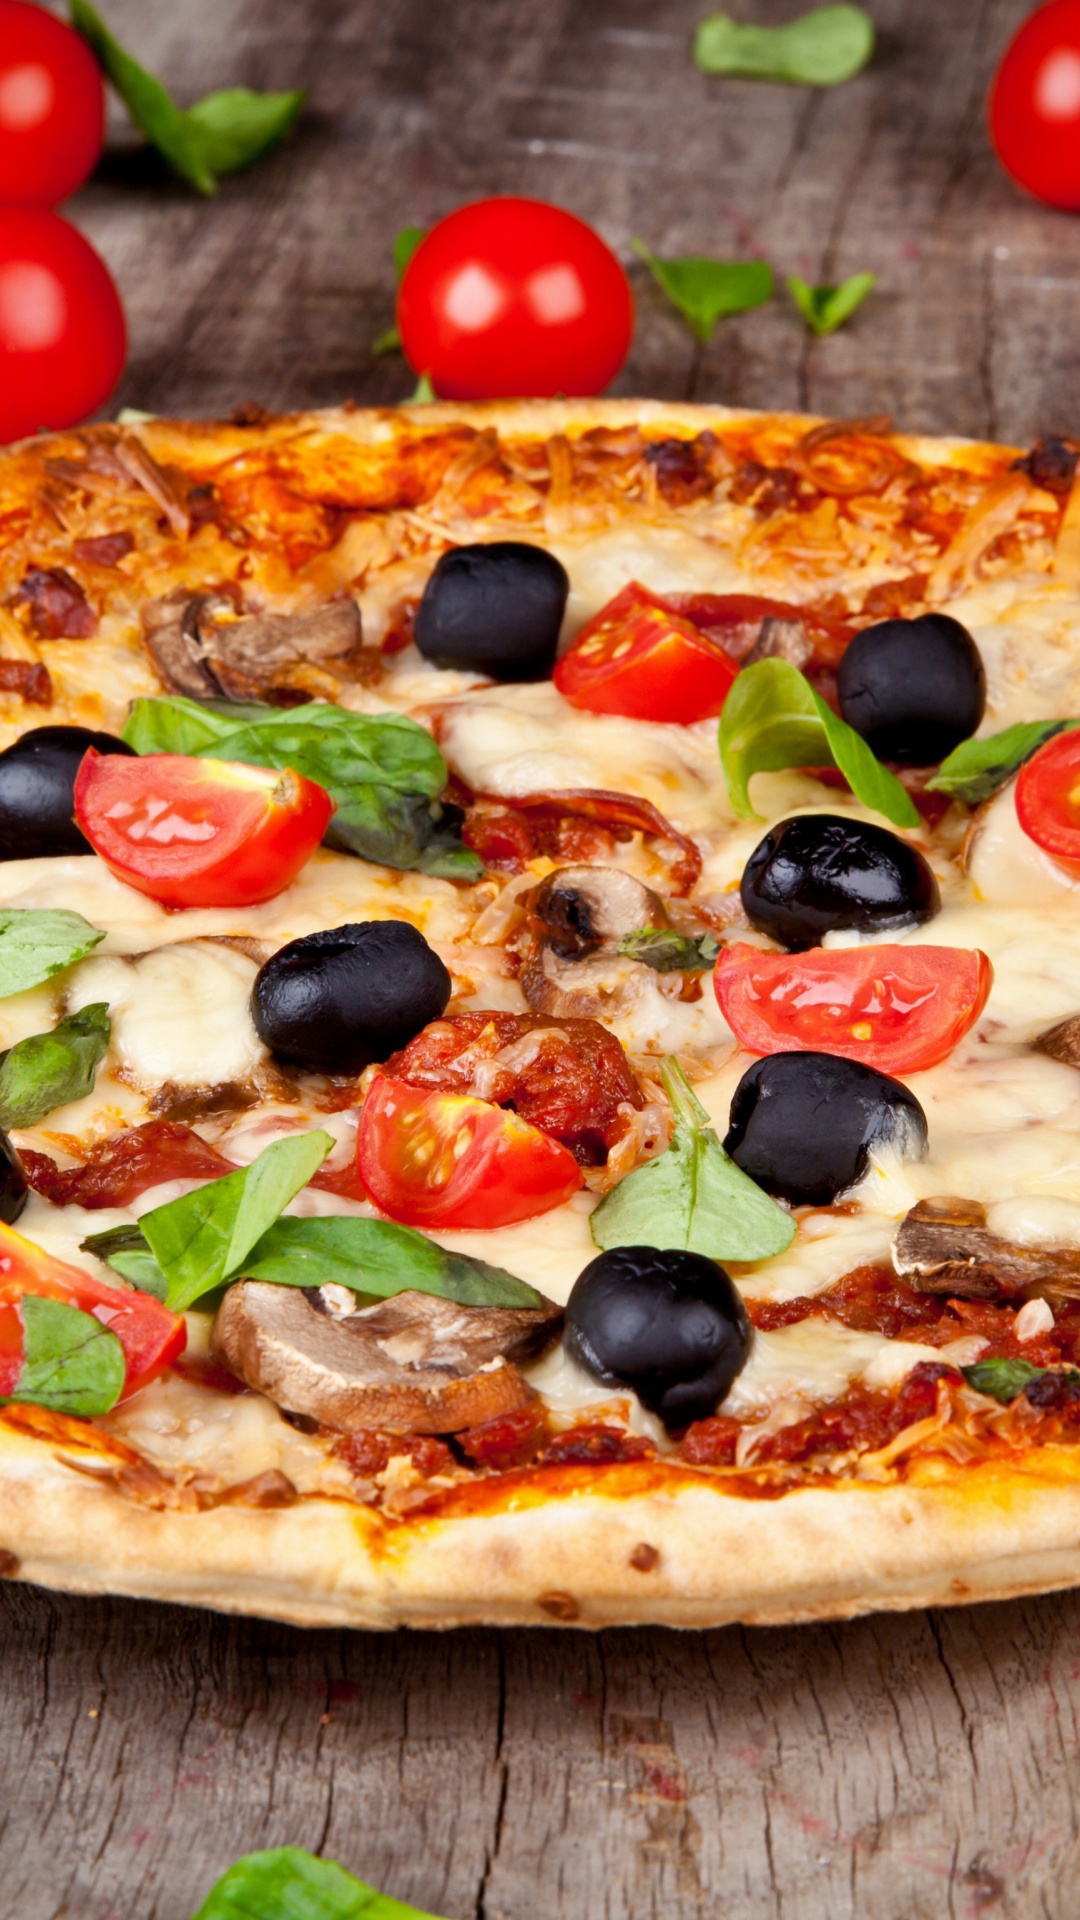 Pizza with tomatoes and olives screenshot #1 1080x1920